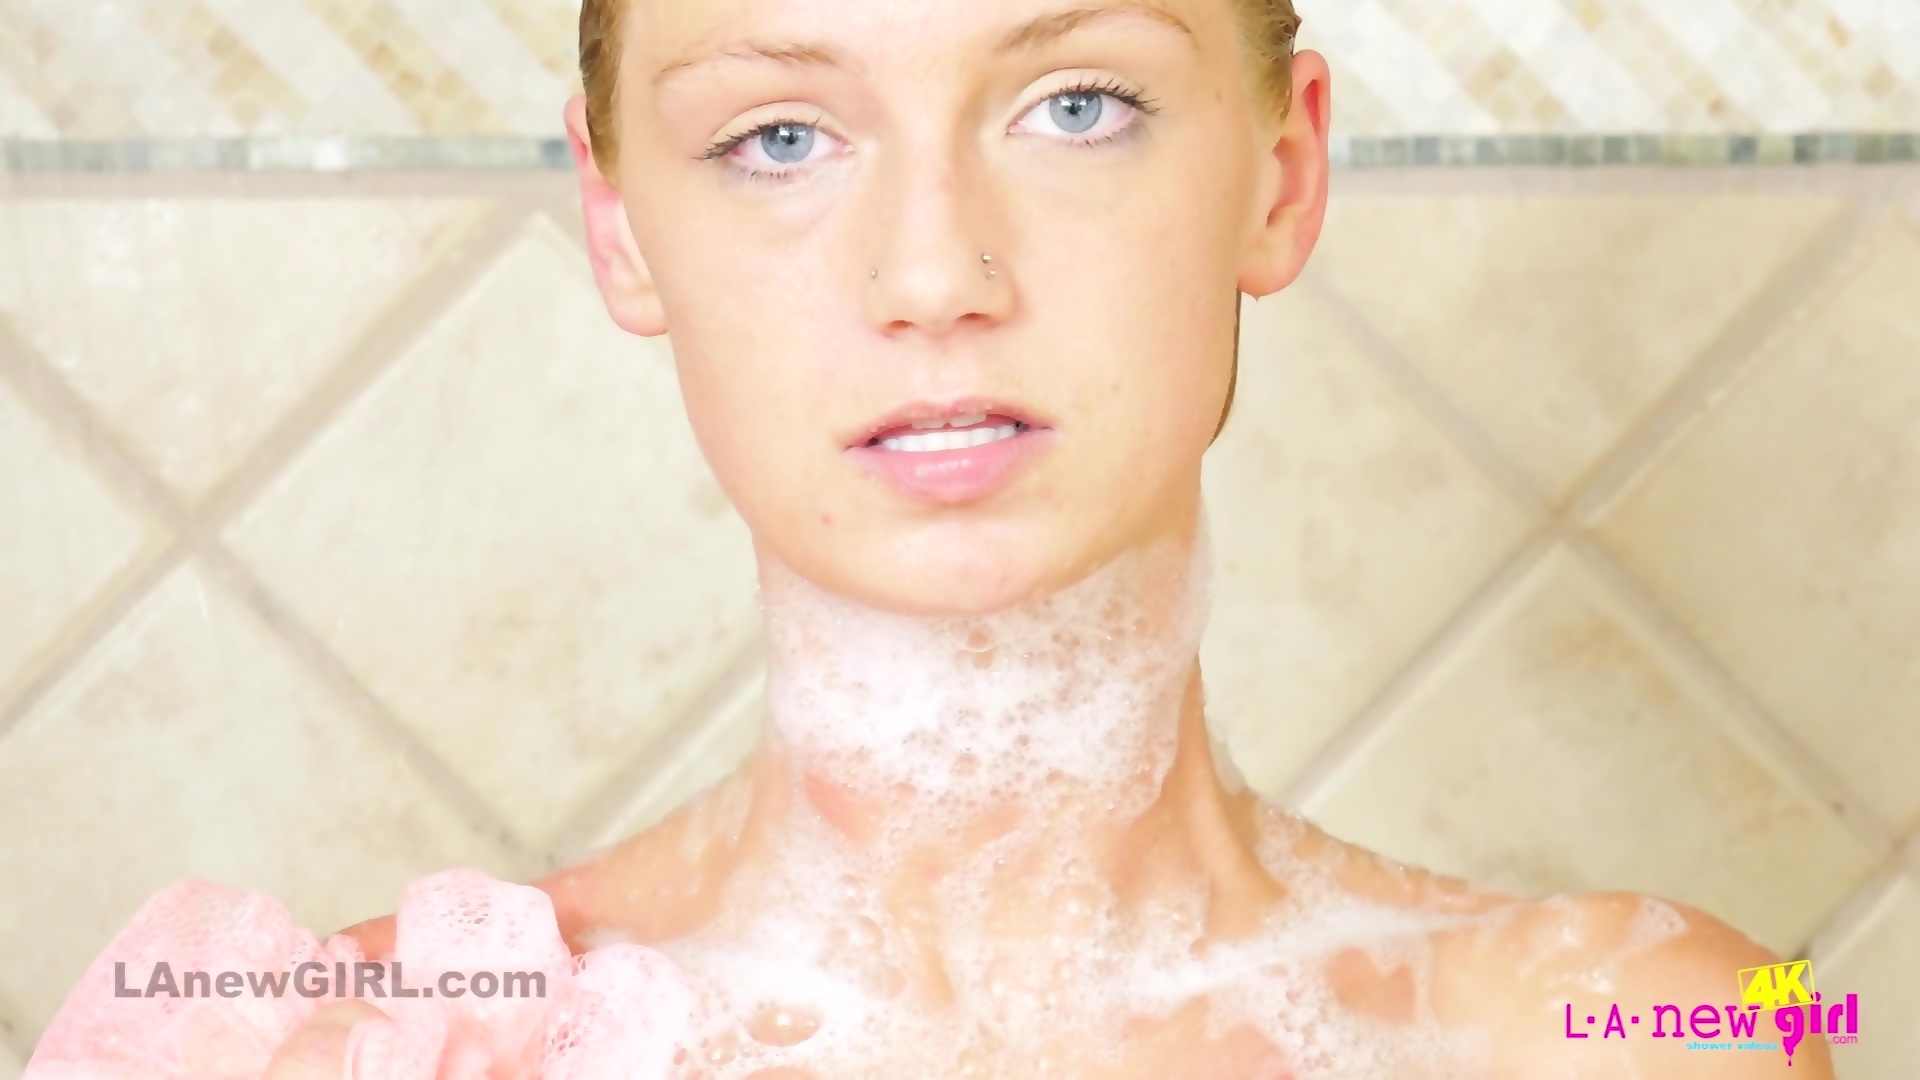 Superb Blonde With Hot Body Gets All Foamy In 4k Shower